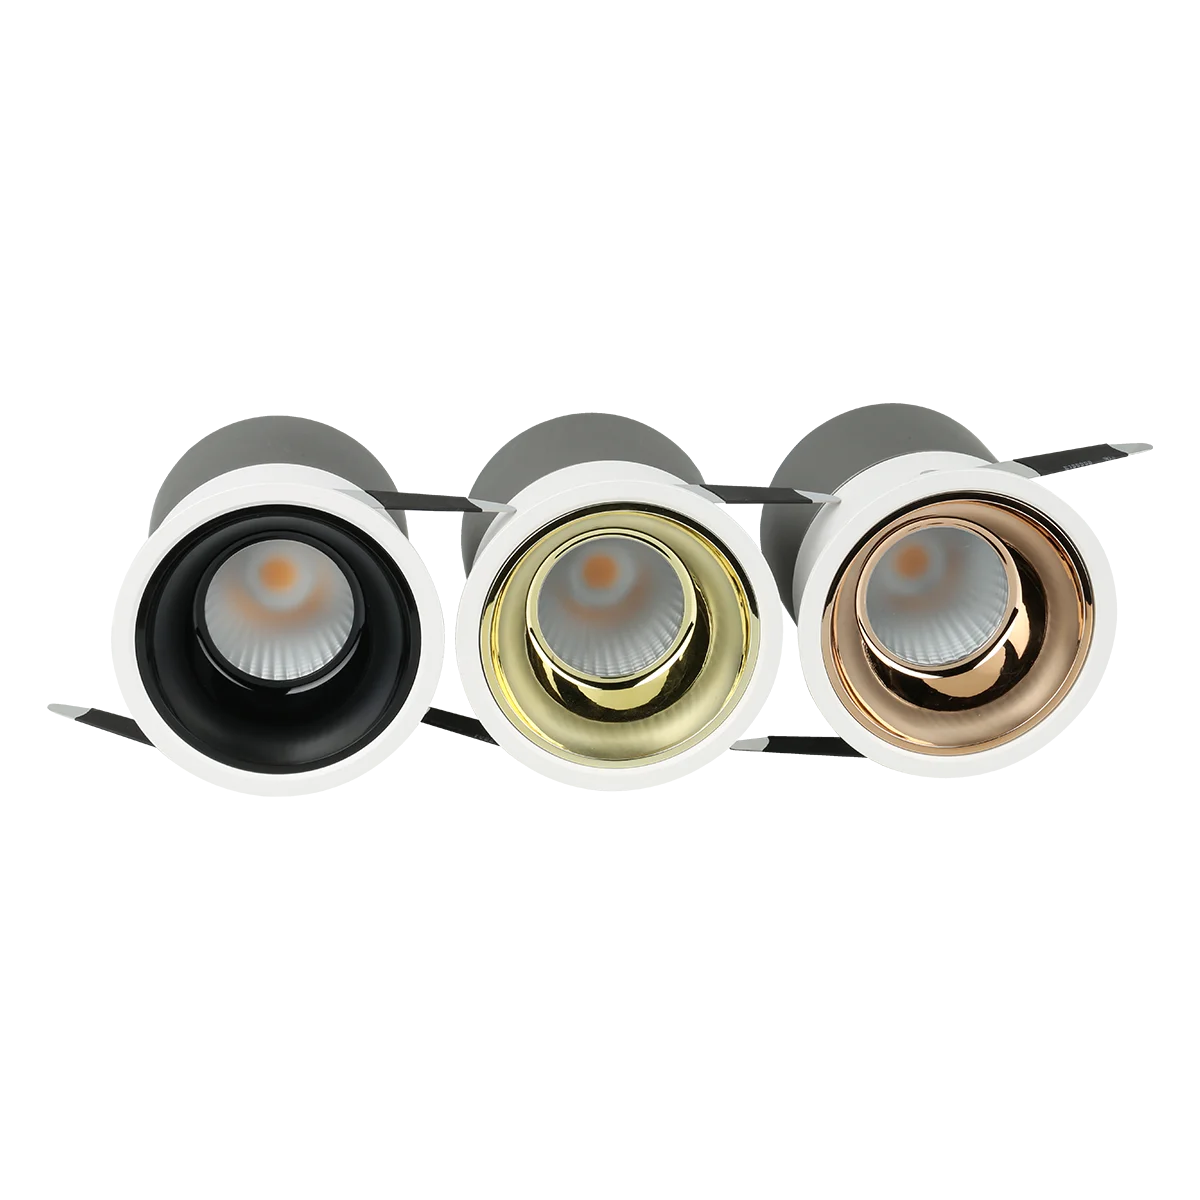 Recessed led down light 30w downlights kits item type